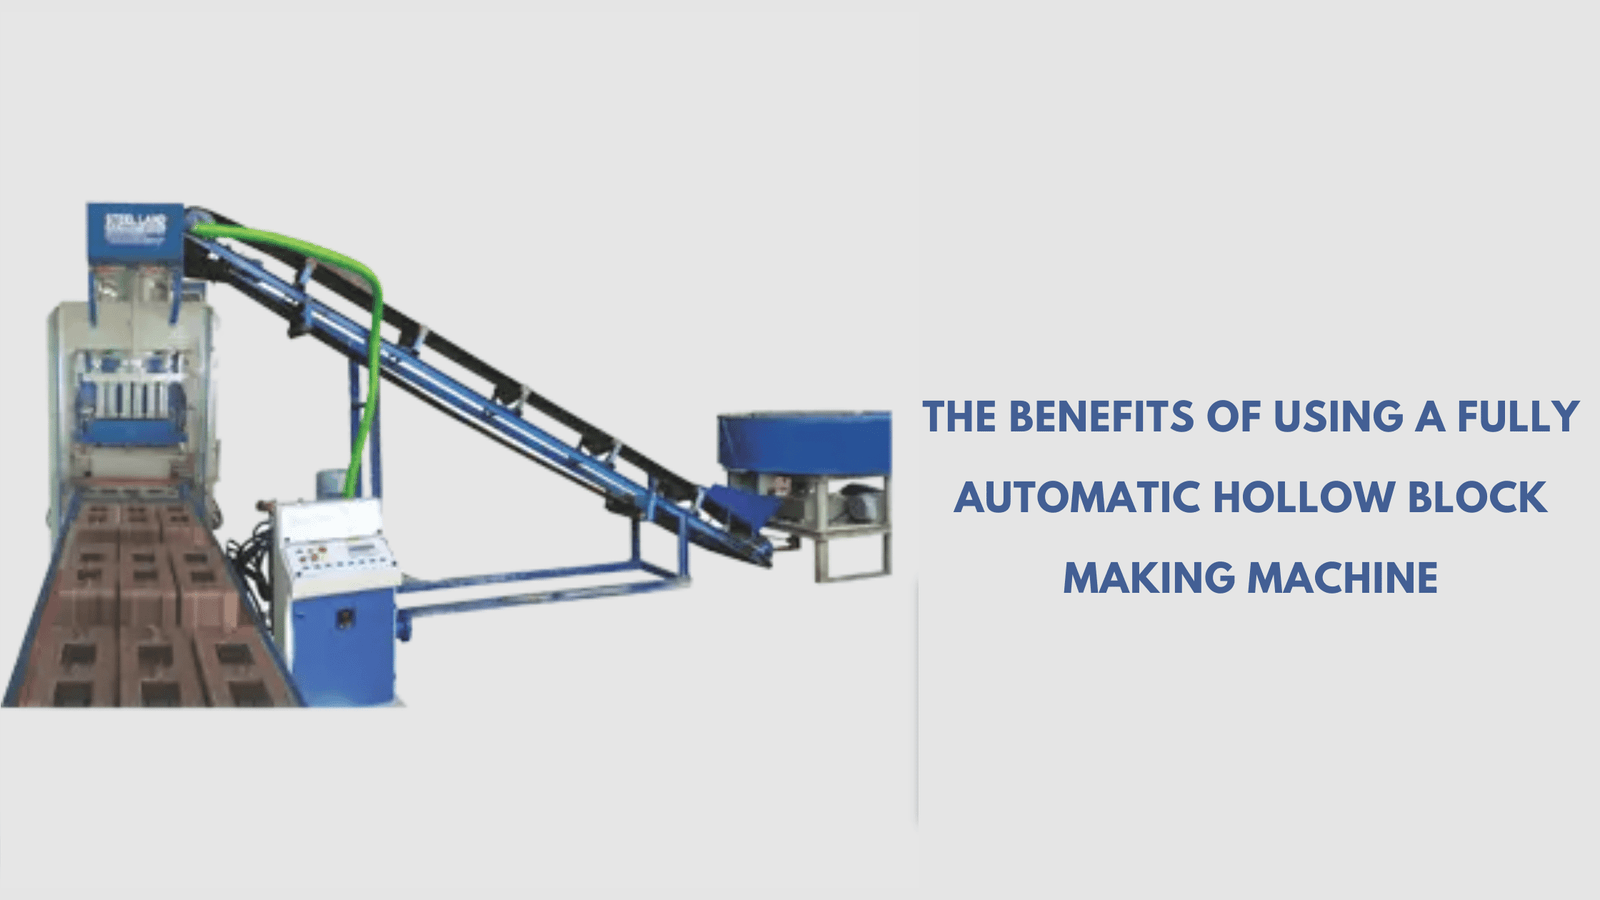 The Benefits of Using a Fully Automatic Hollow Block Making Machine